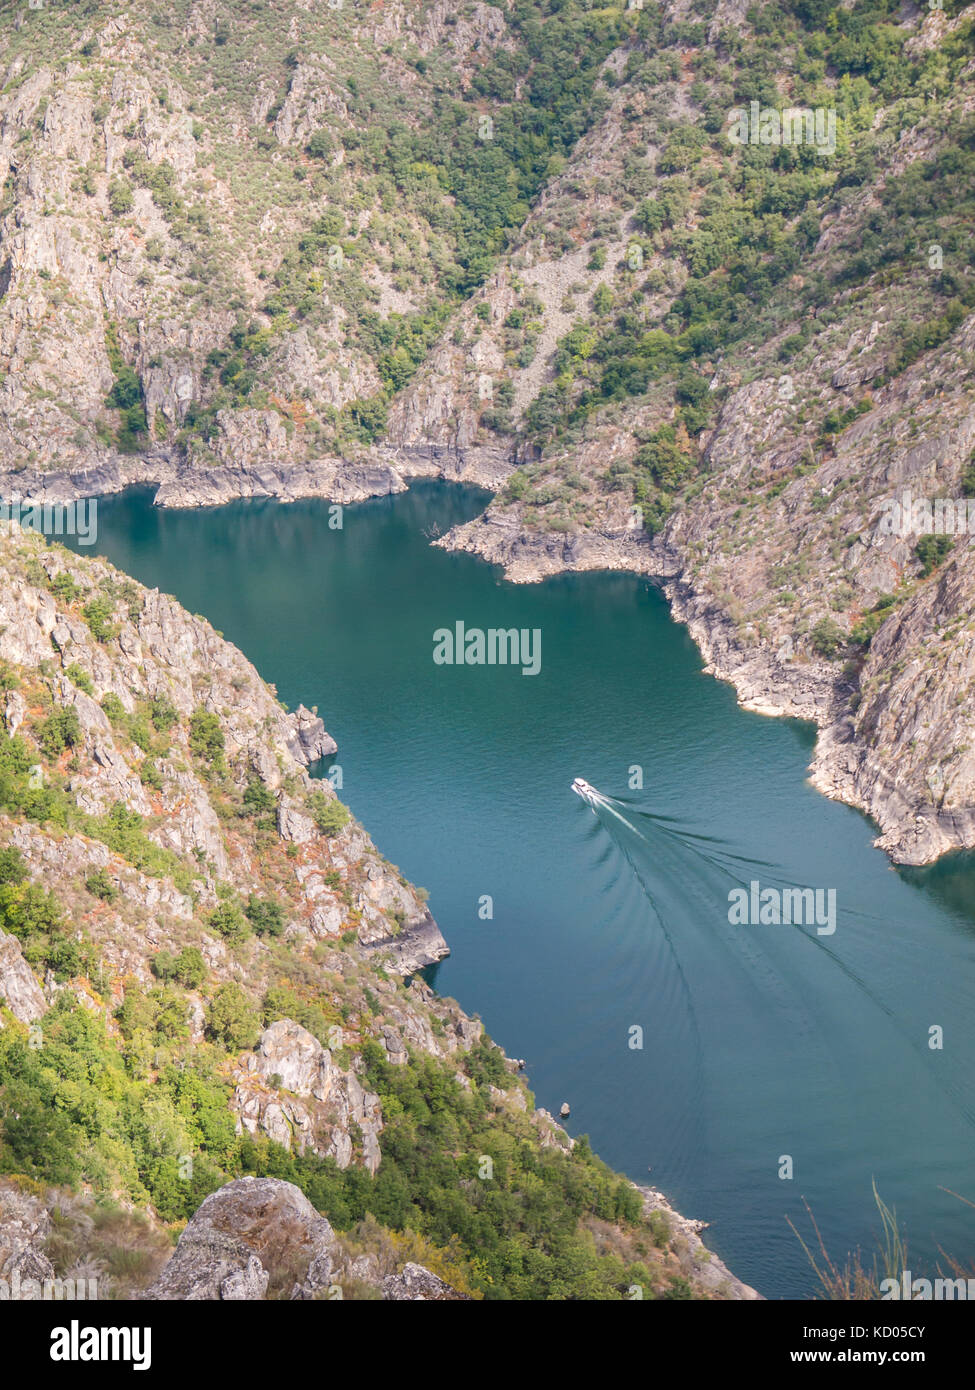 Excursion boat in the canyon of Sil river in the province of Ourense, Galicia, Spain. Ribeira Sacra deep canyon landscape view from Vilouxe viewpoint. Stock Photo